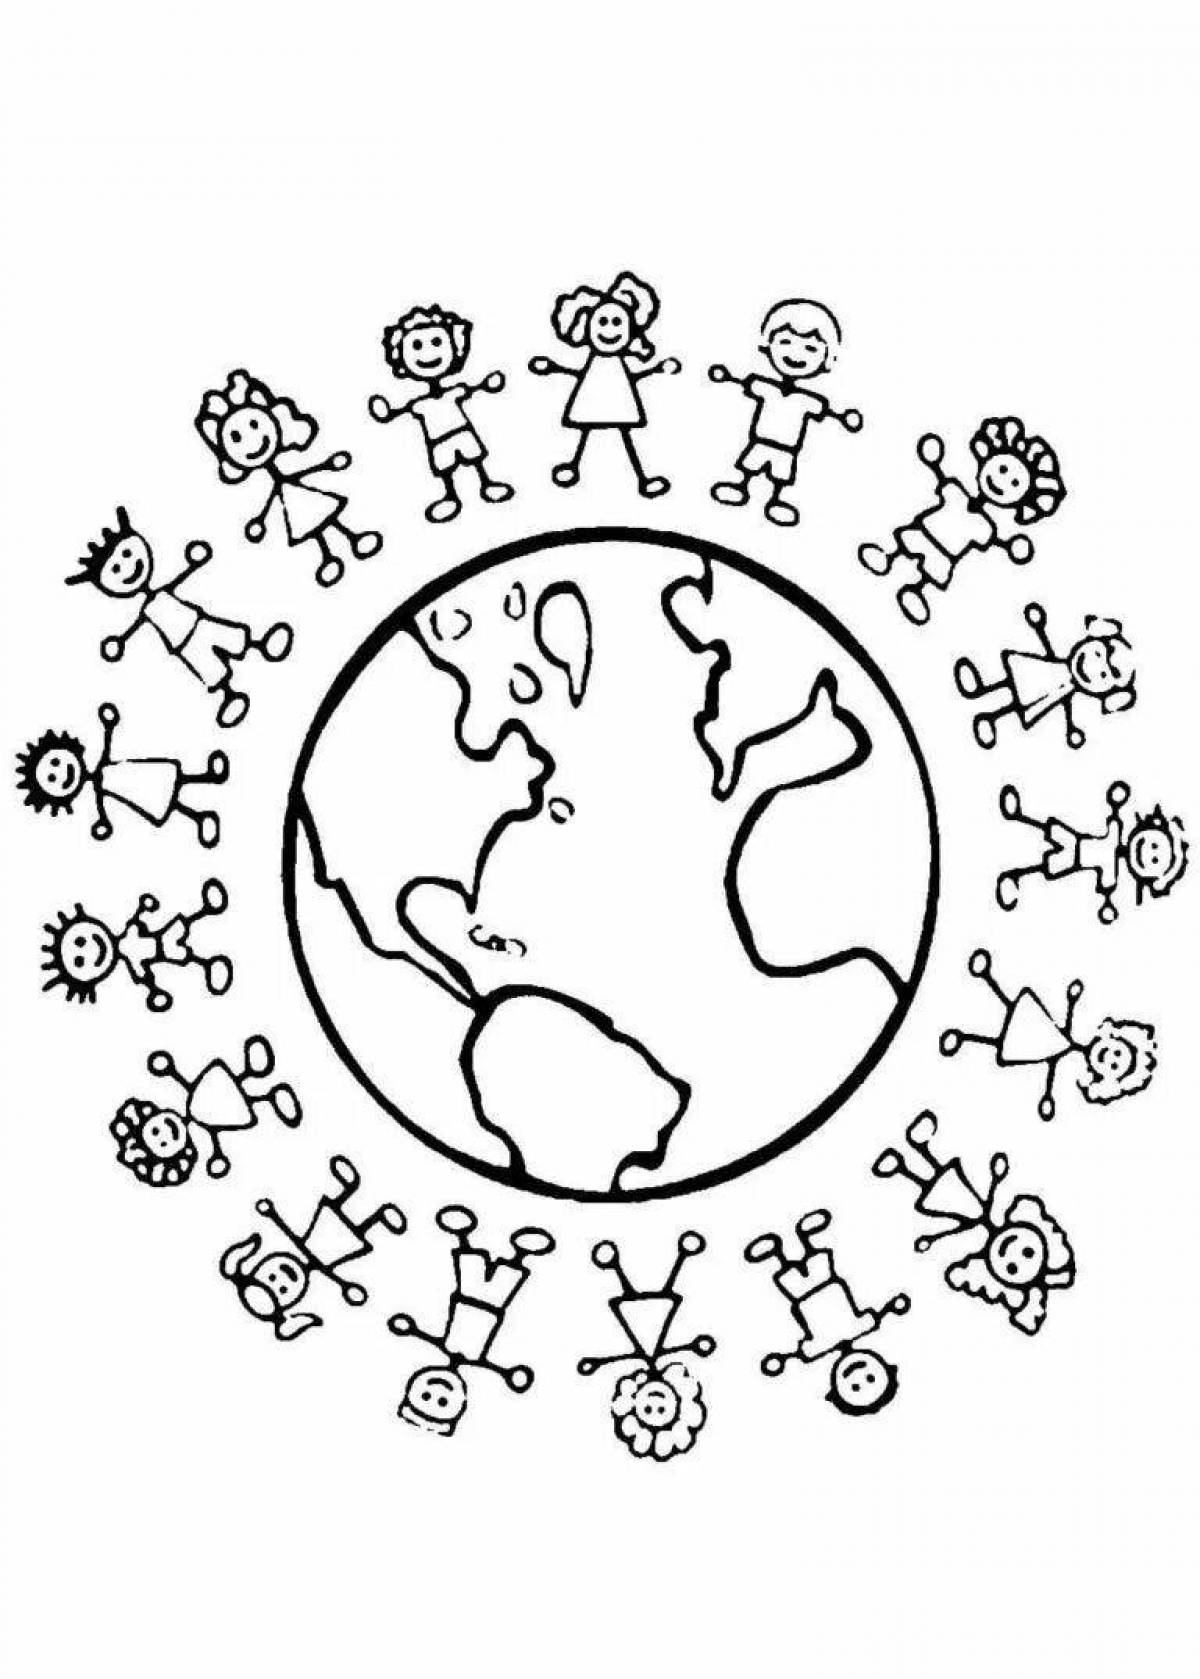 Coloring page divine peace on earth